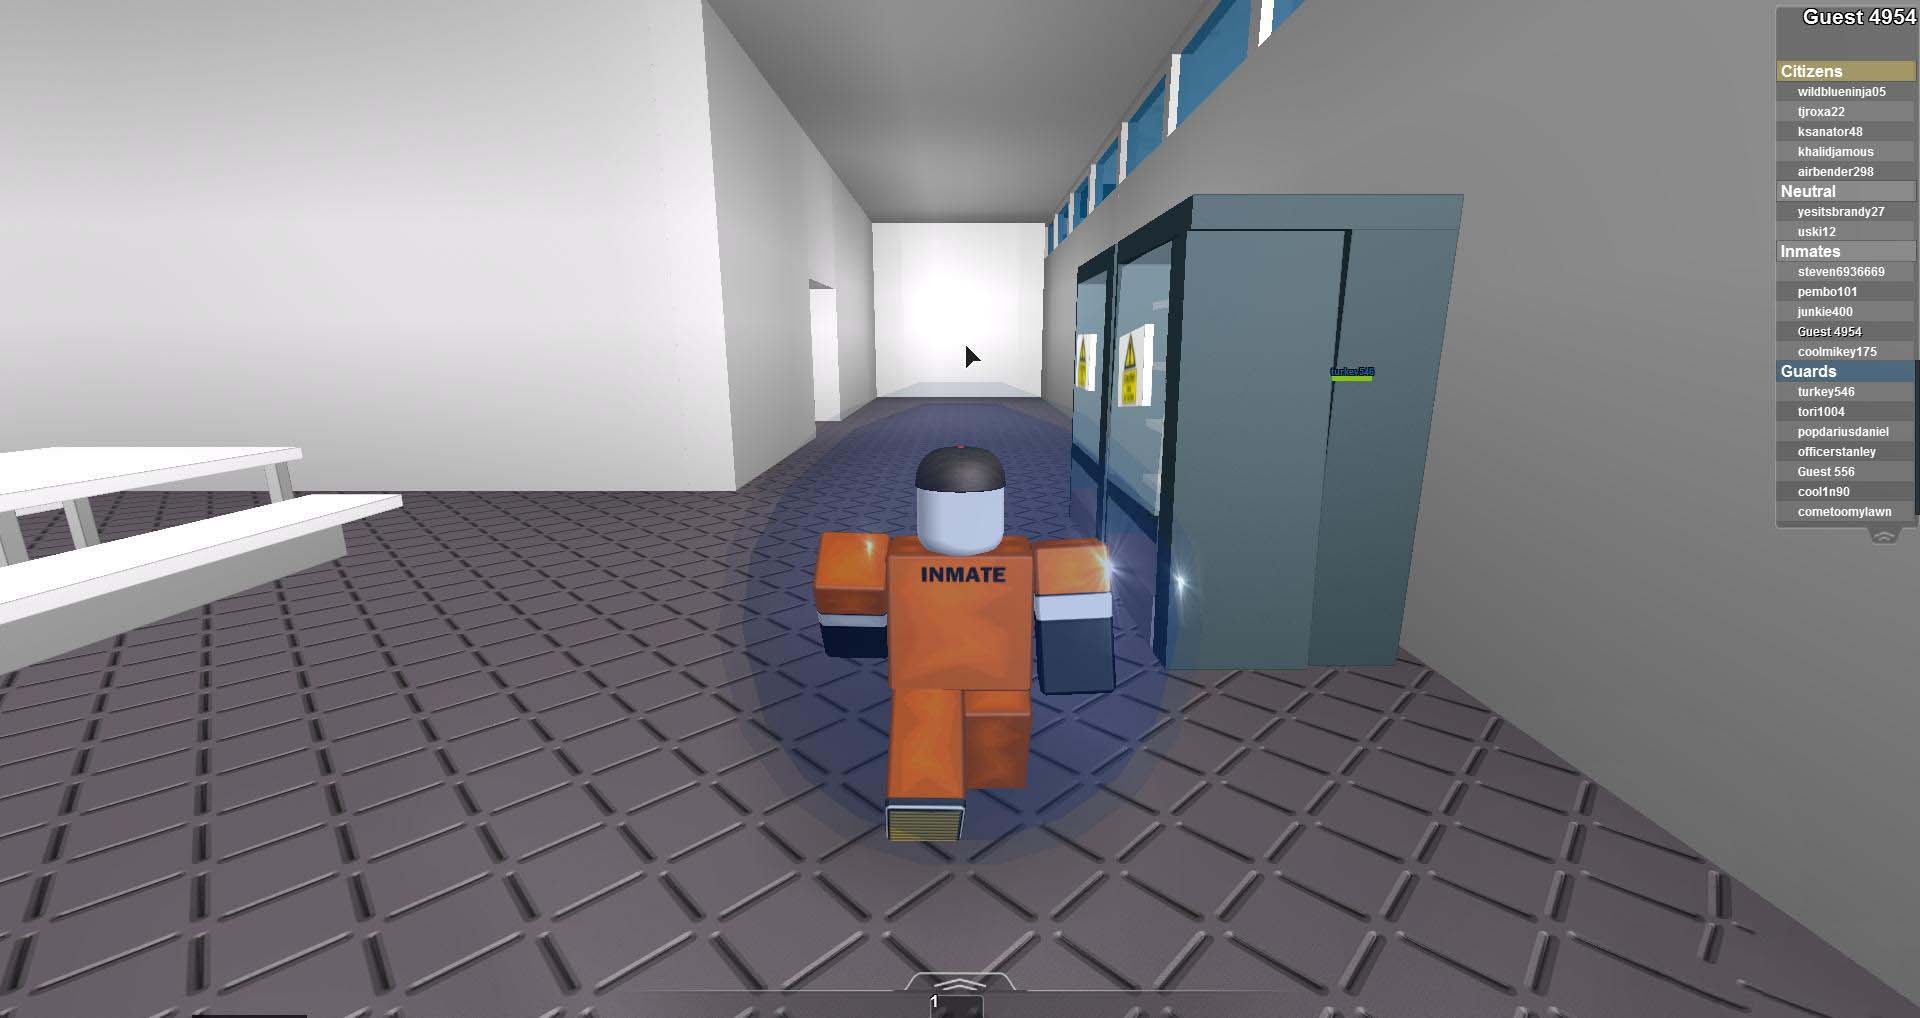 Roblox my game